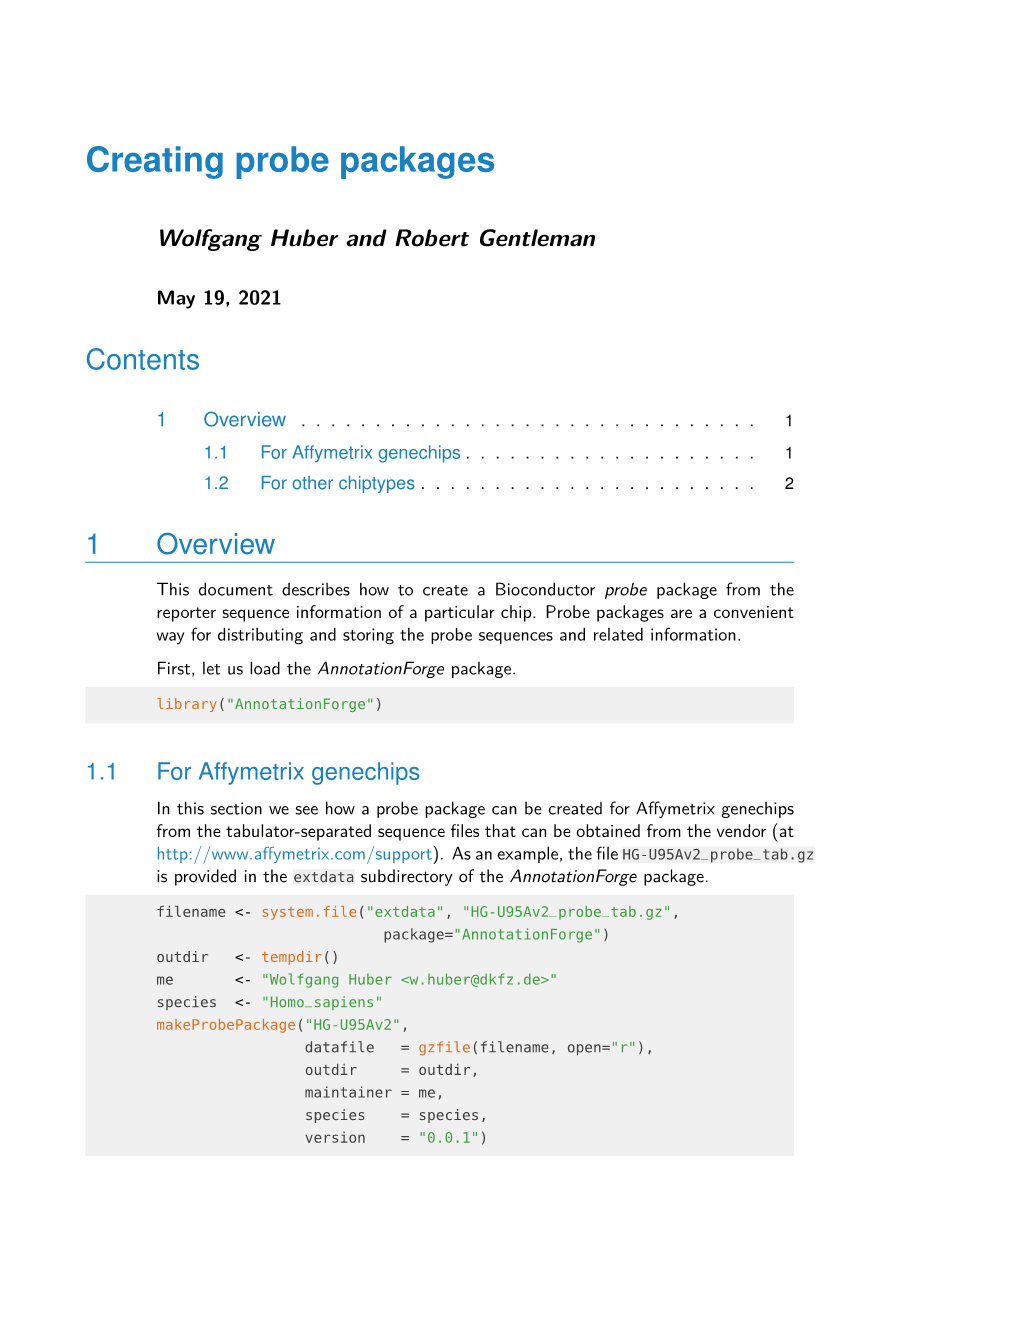 Creating Probe Packages